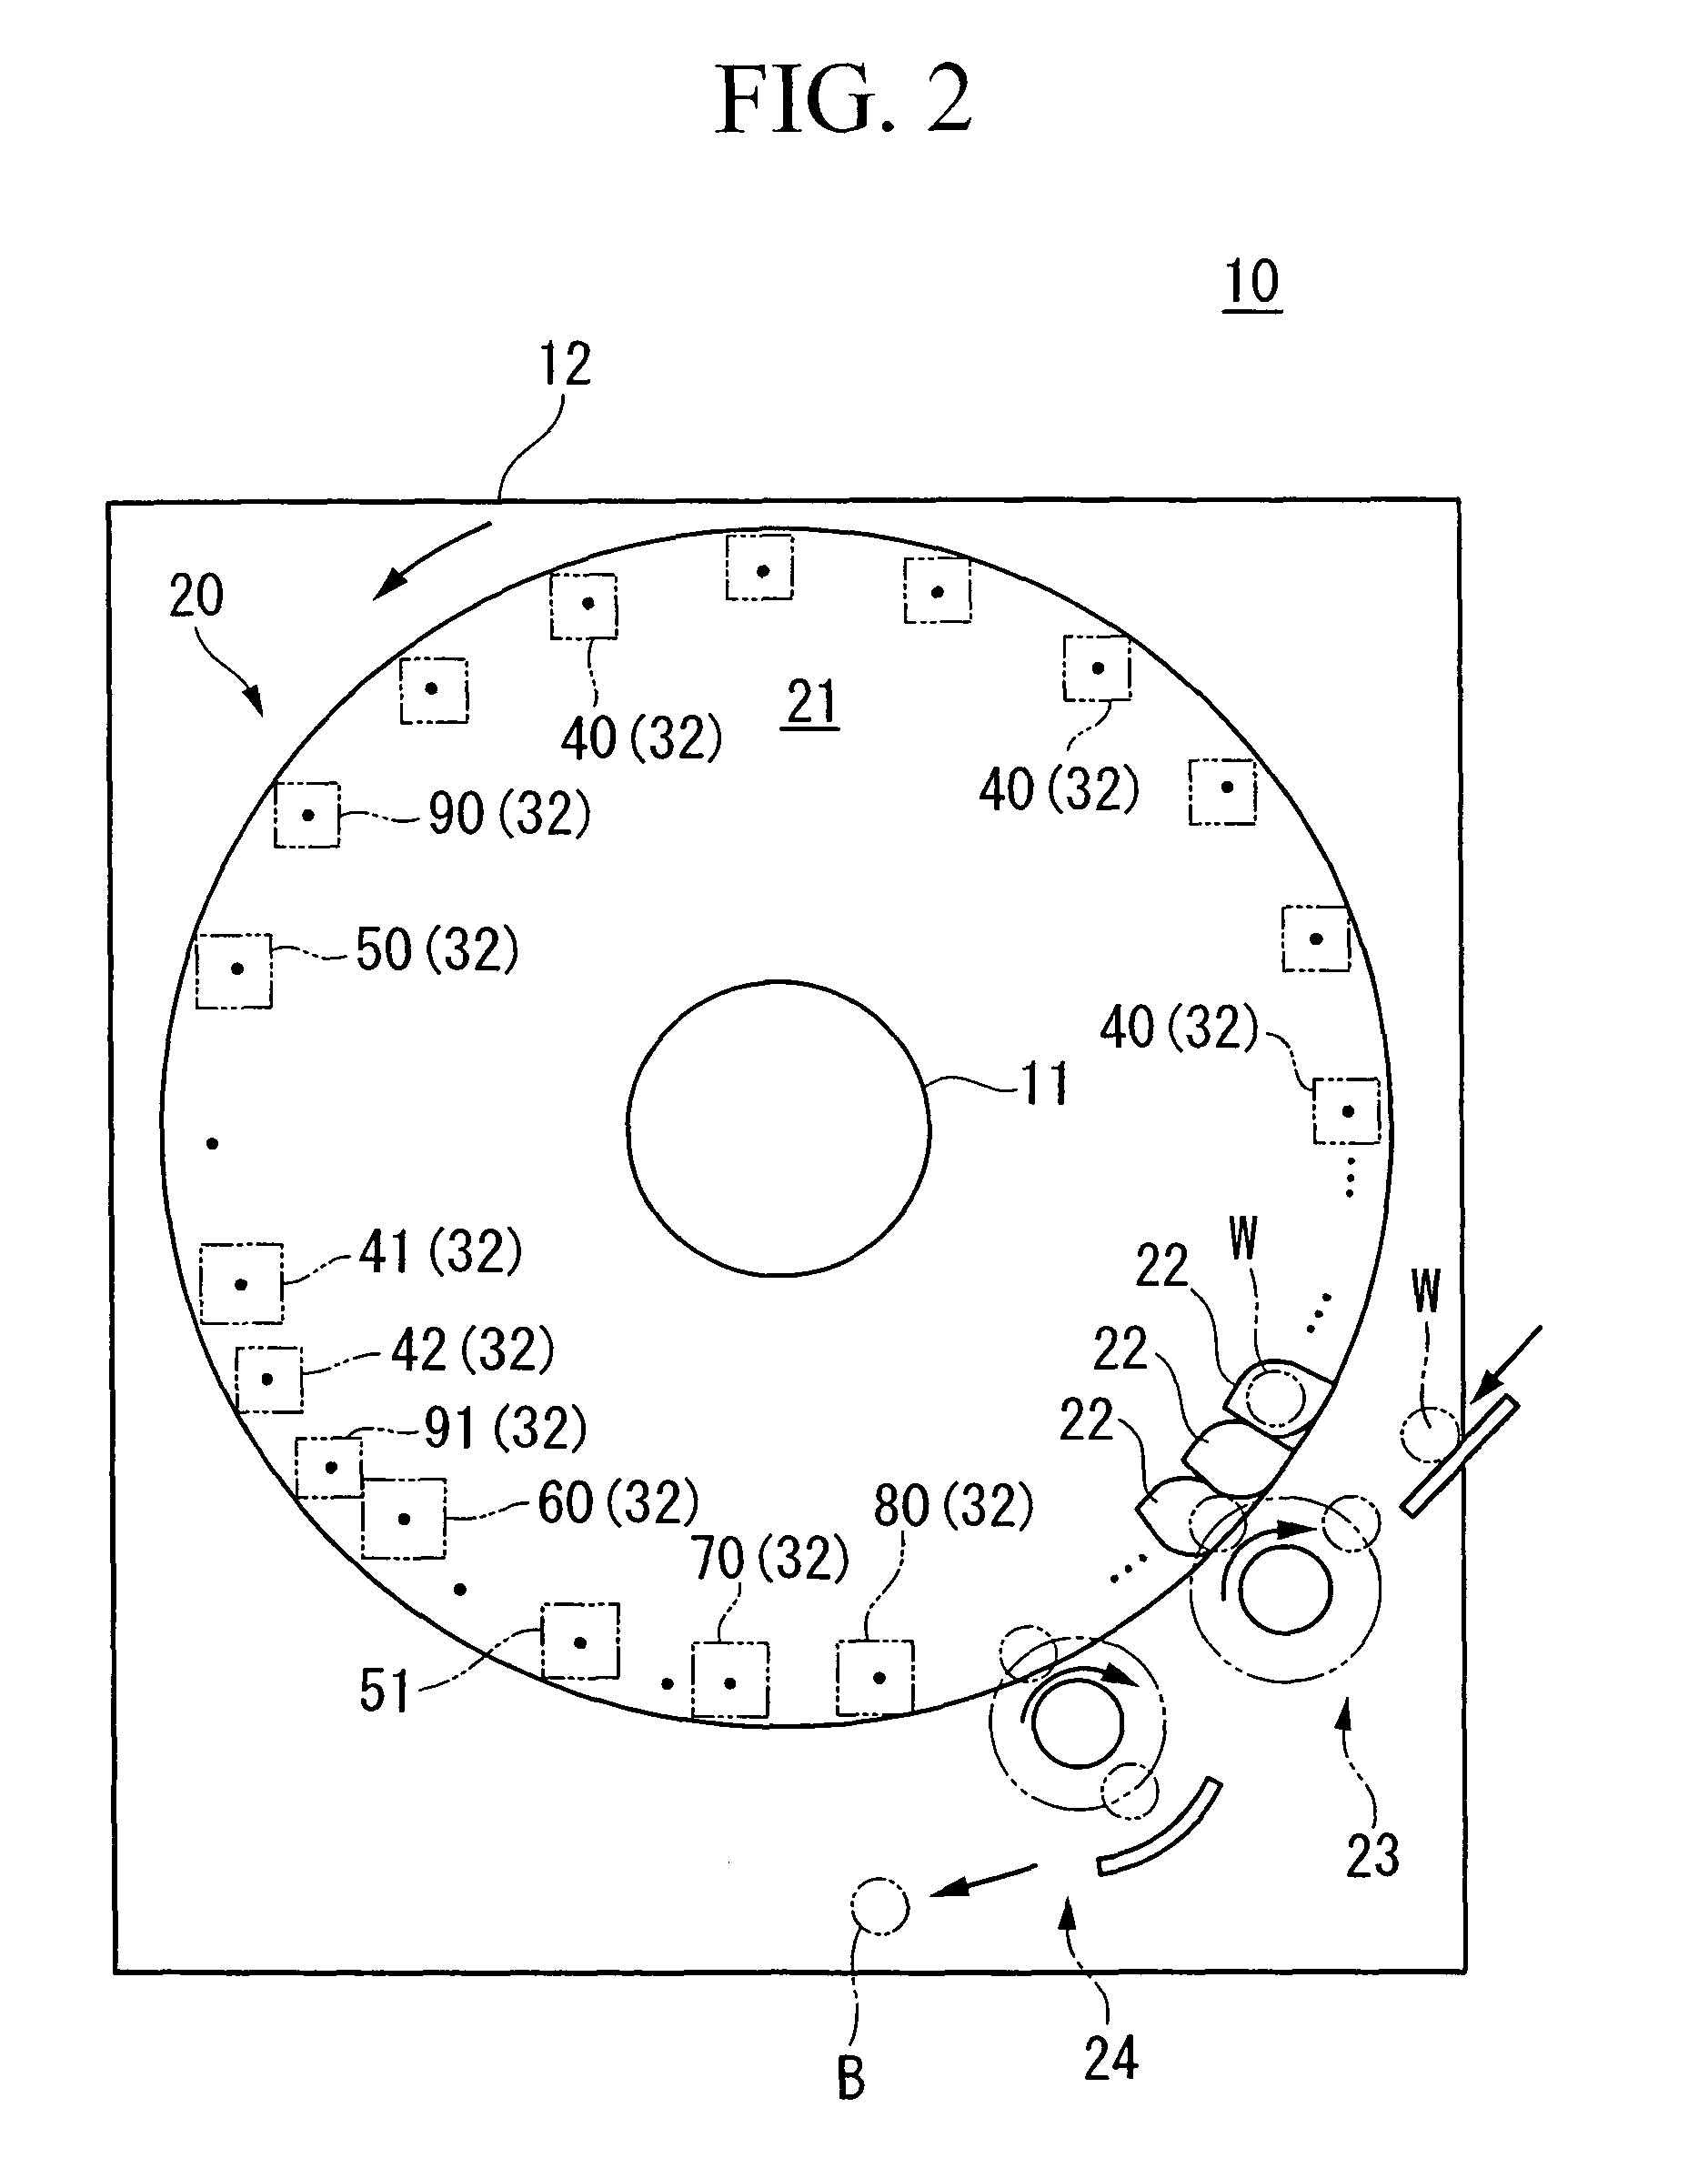 Apparatus for producing bottle can